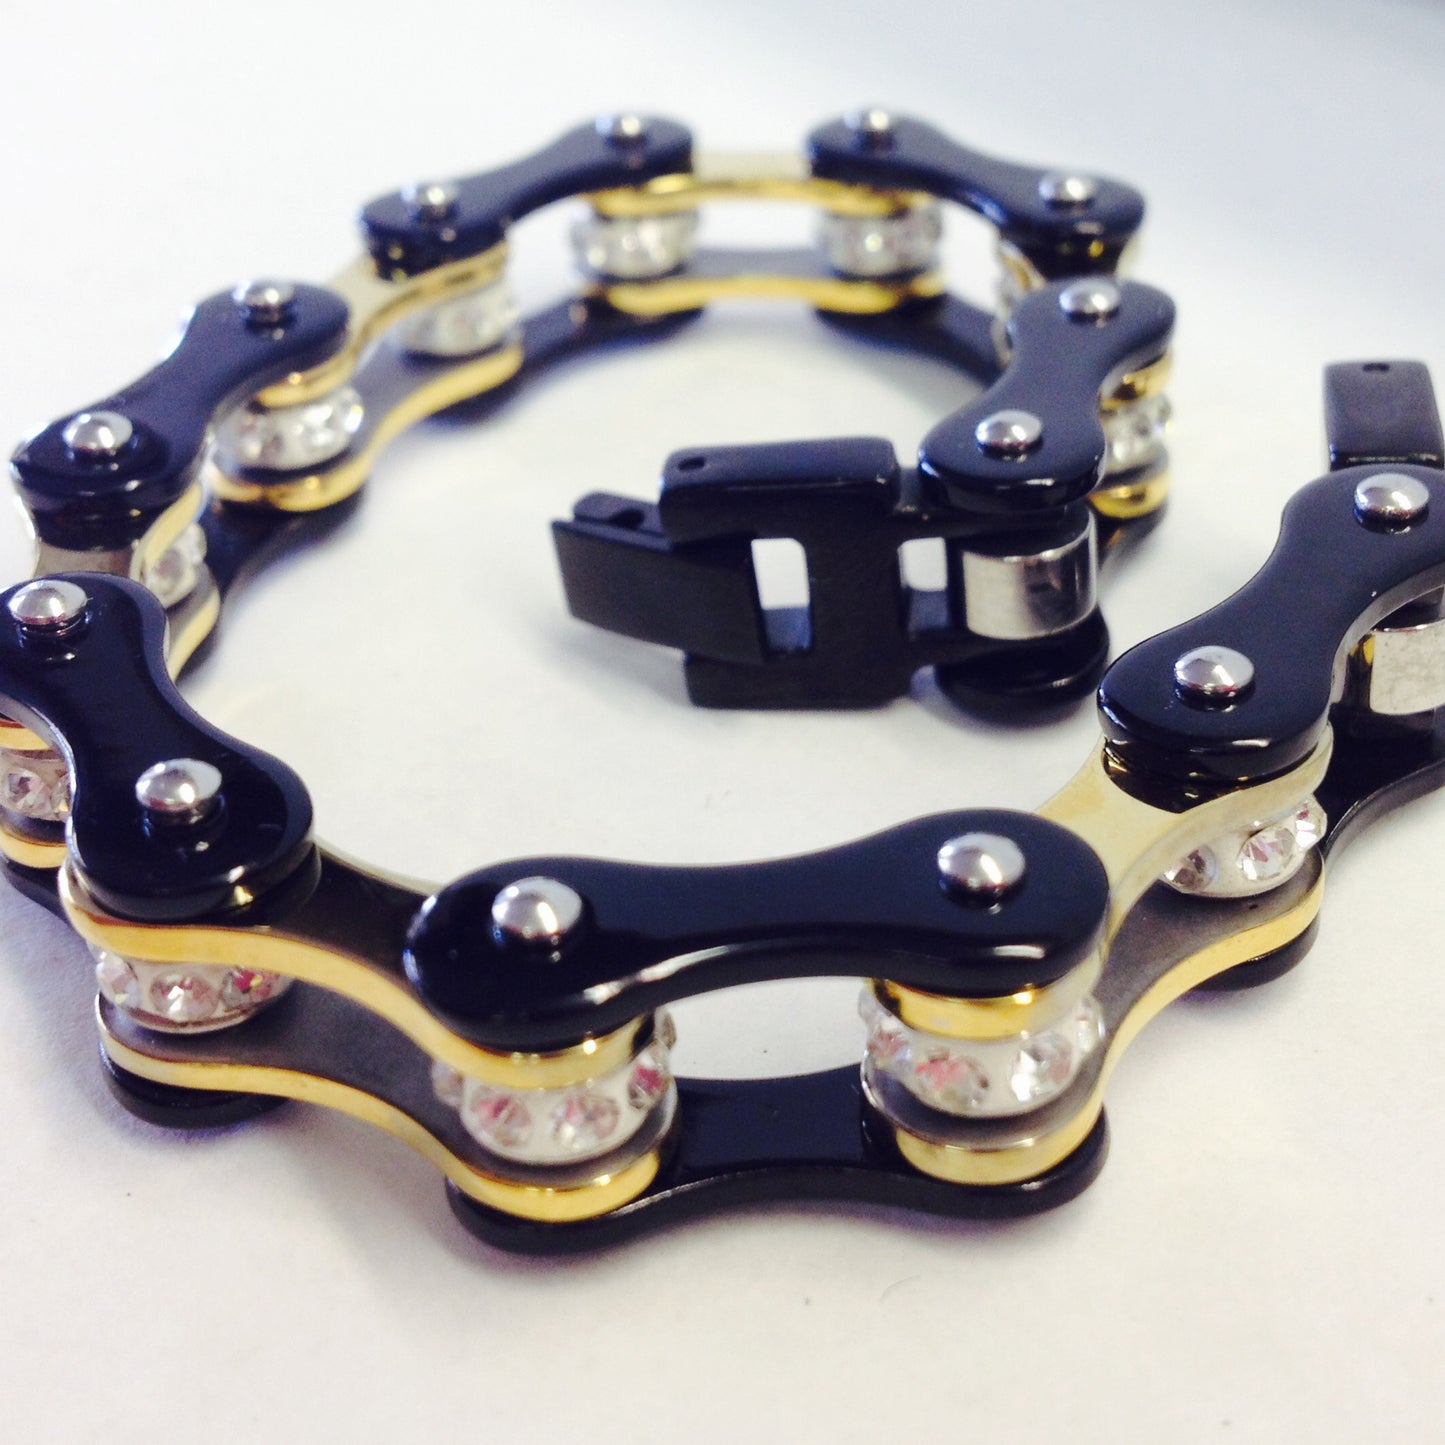 Bling Bike Chain-Black and Gold - Unleashed Jewelry